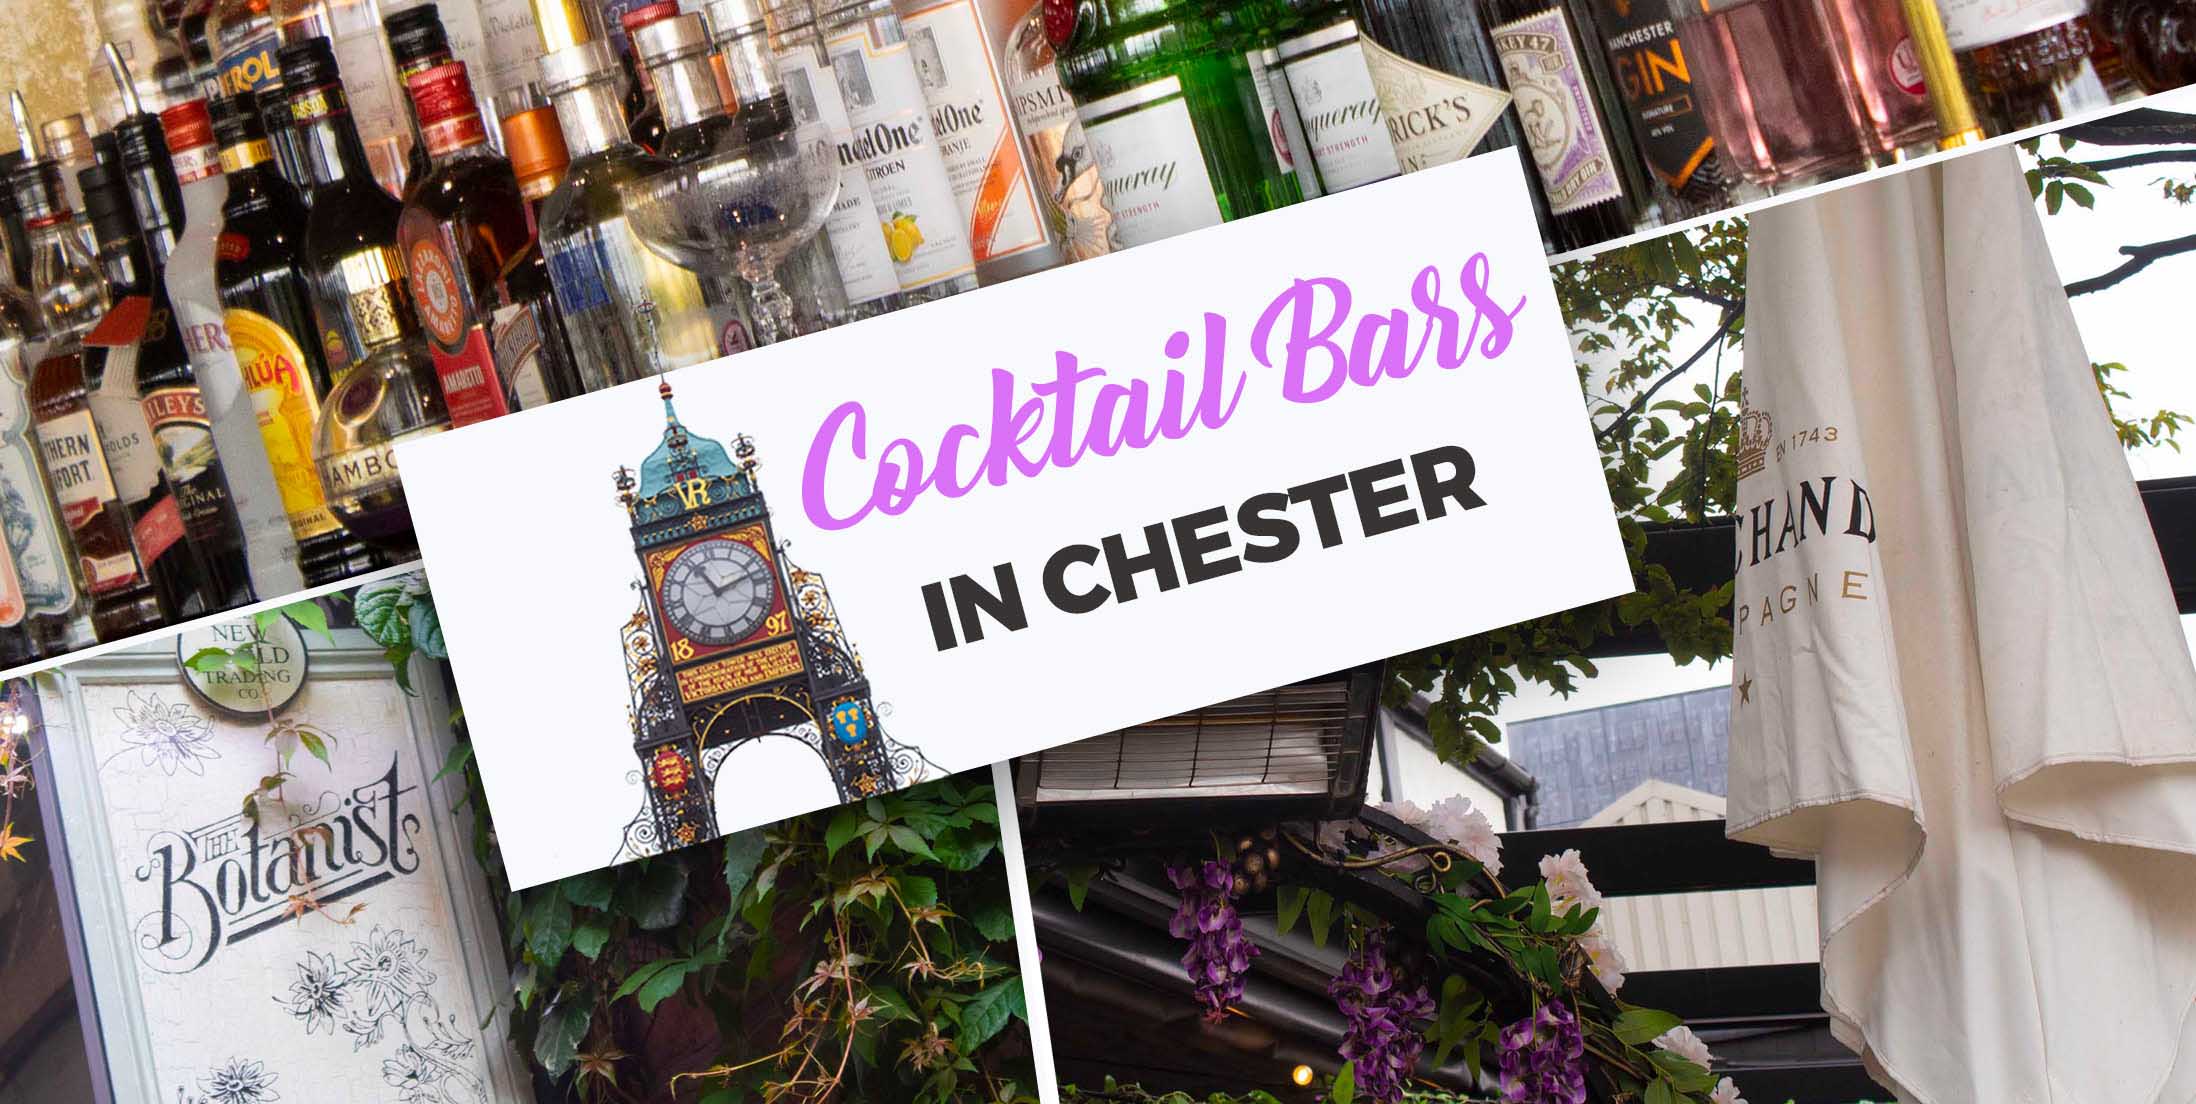 Cocktail Bars in Chester (Banner)